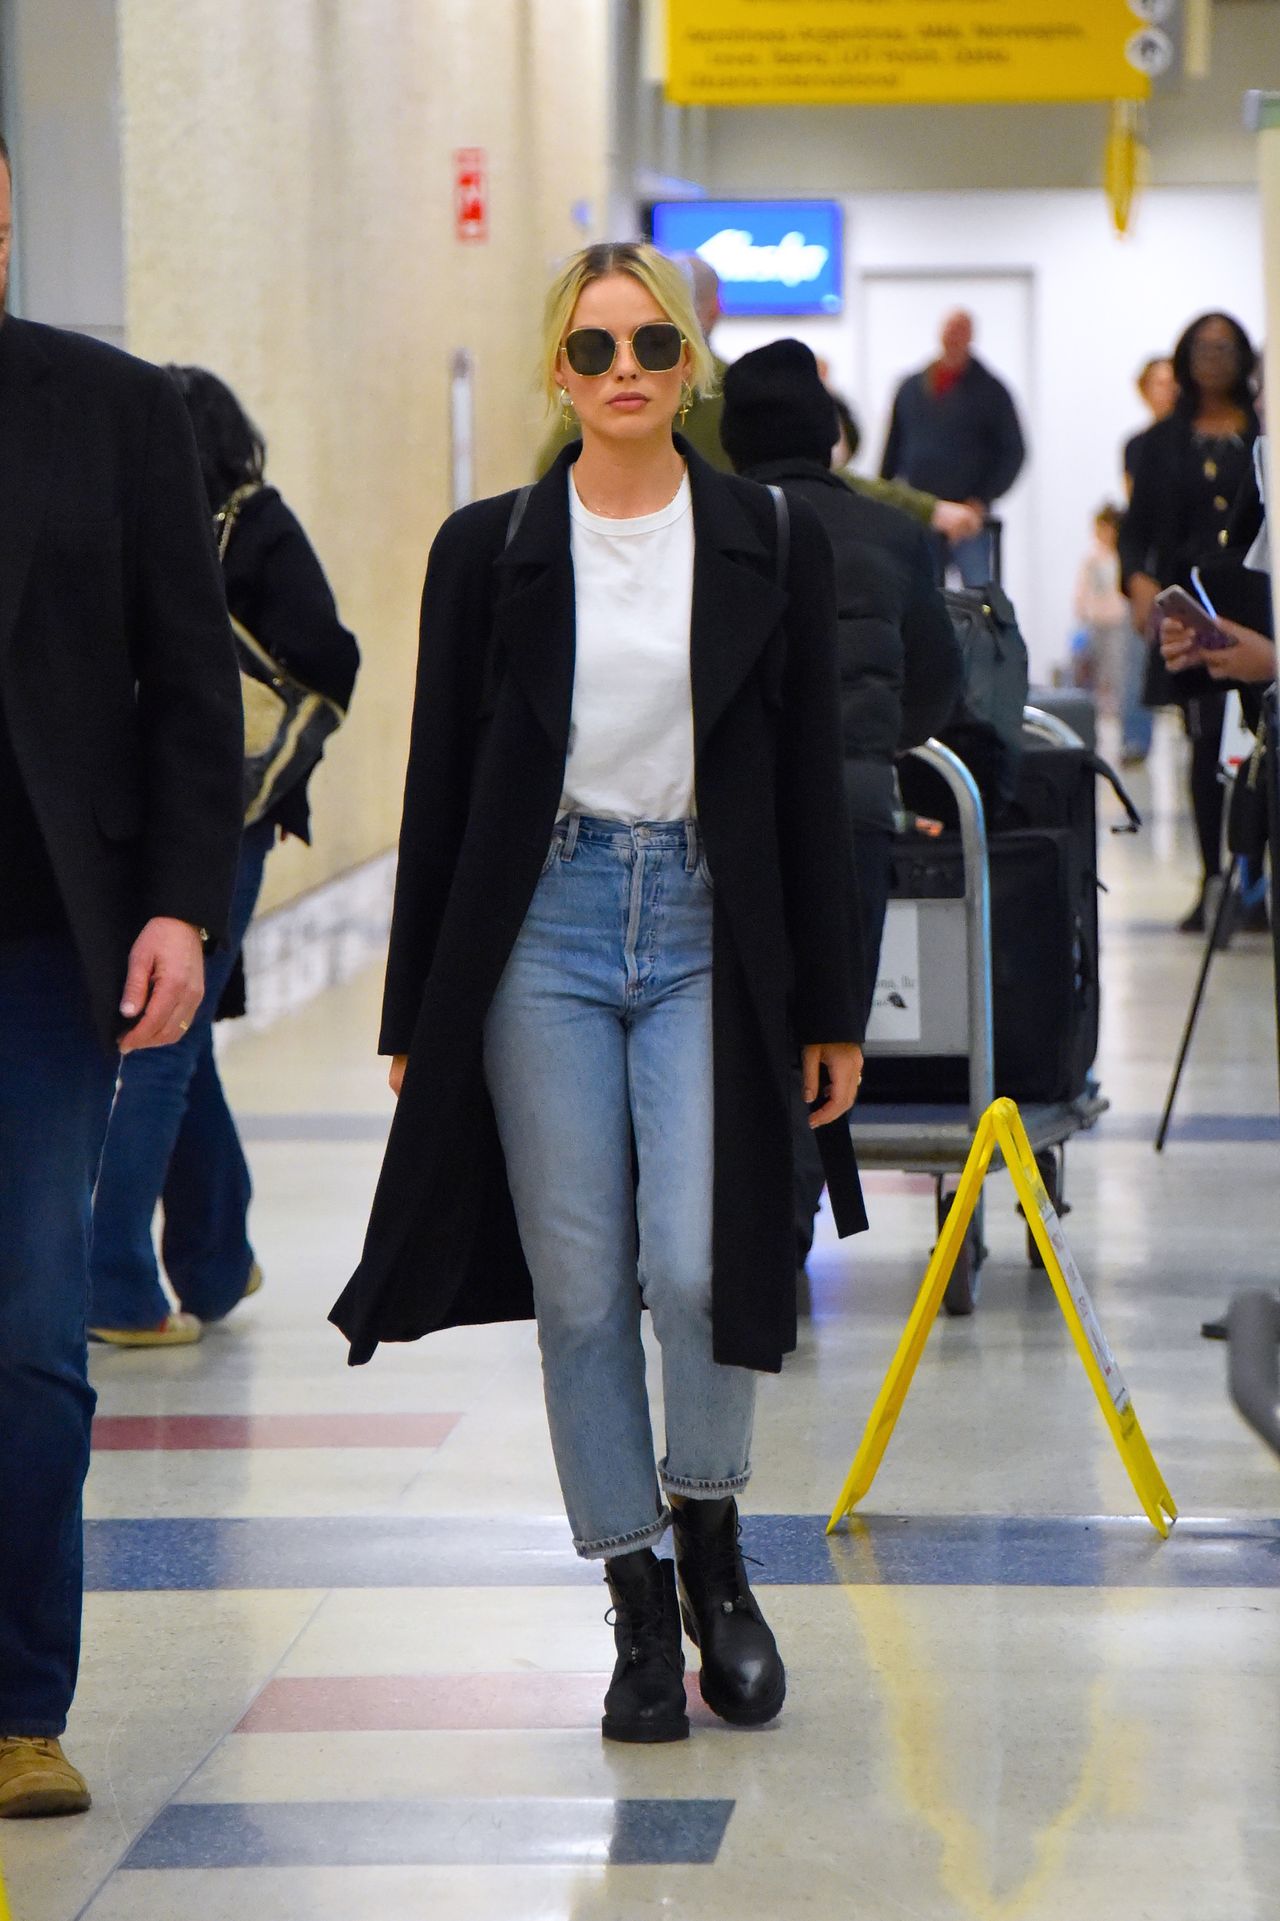 The Best Celebrity Boot Outfits Everyone Should Try | Who What Wear